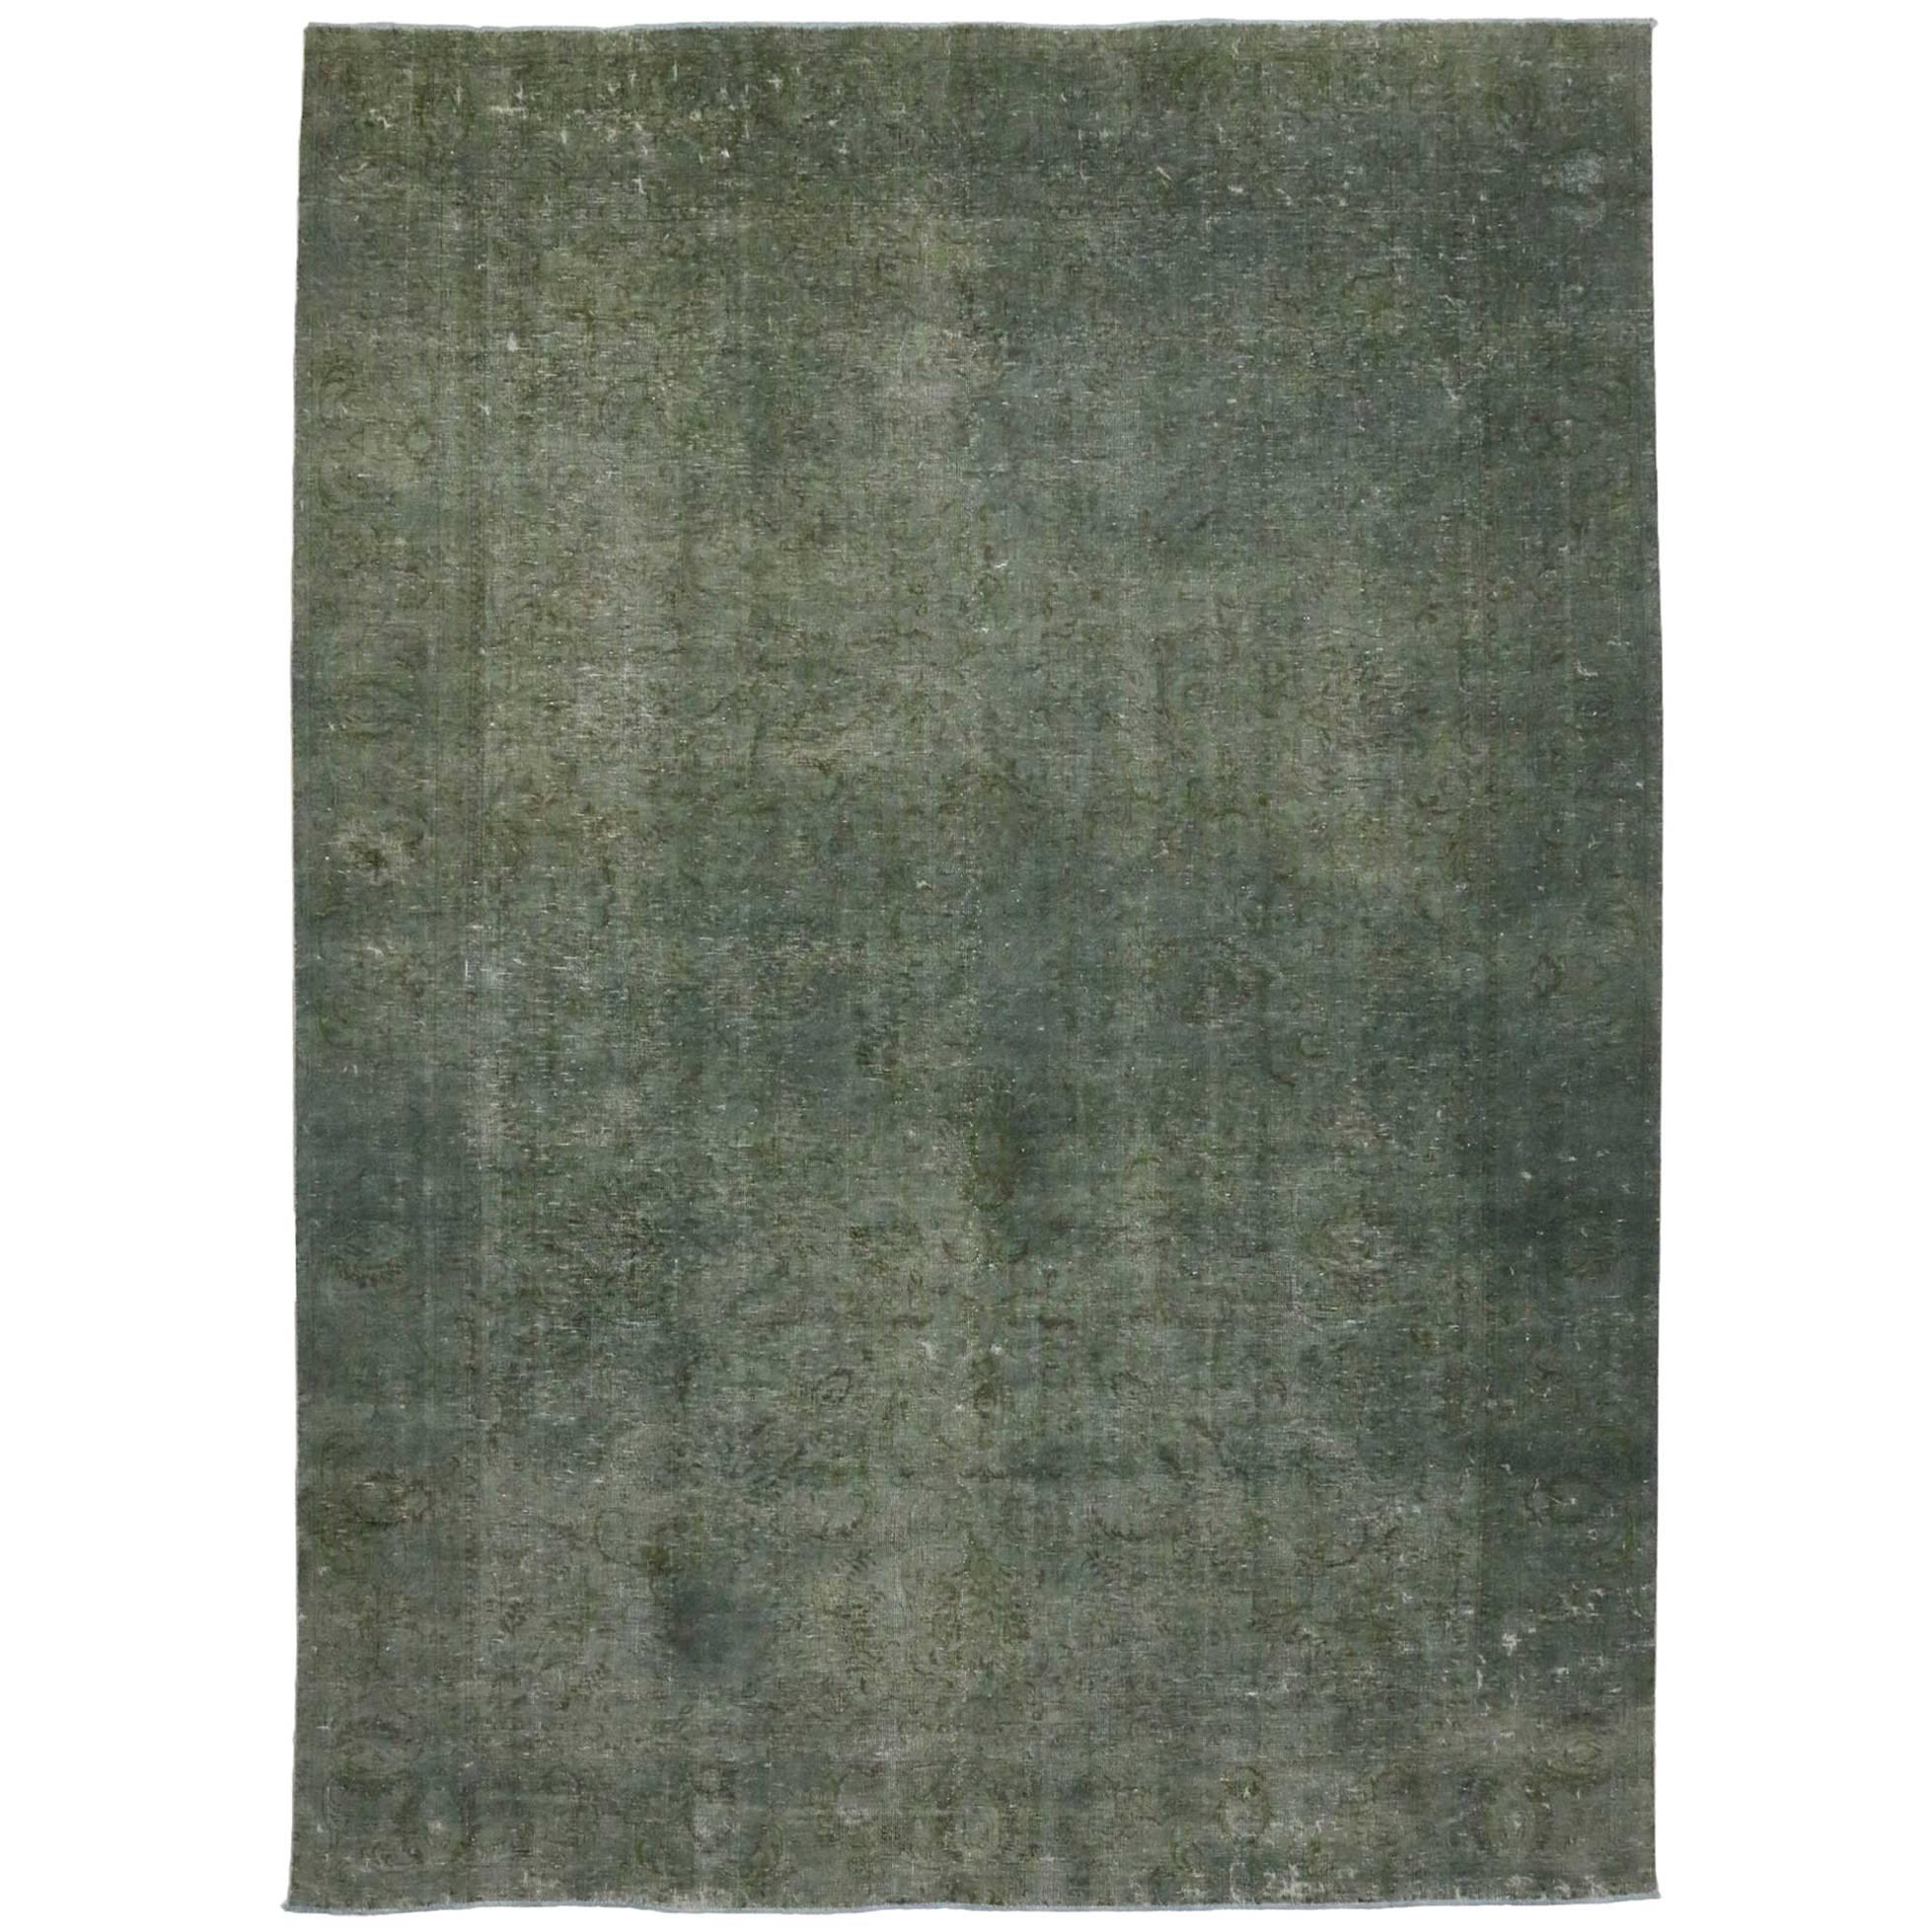 Distressed Vintage Persian Rug Overdyed with Modern Industrial Style